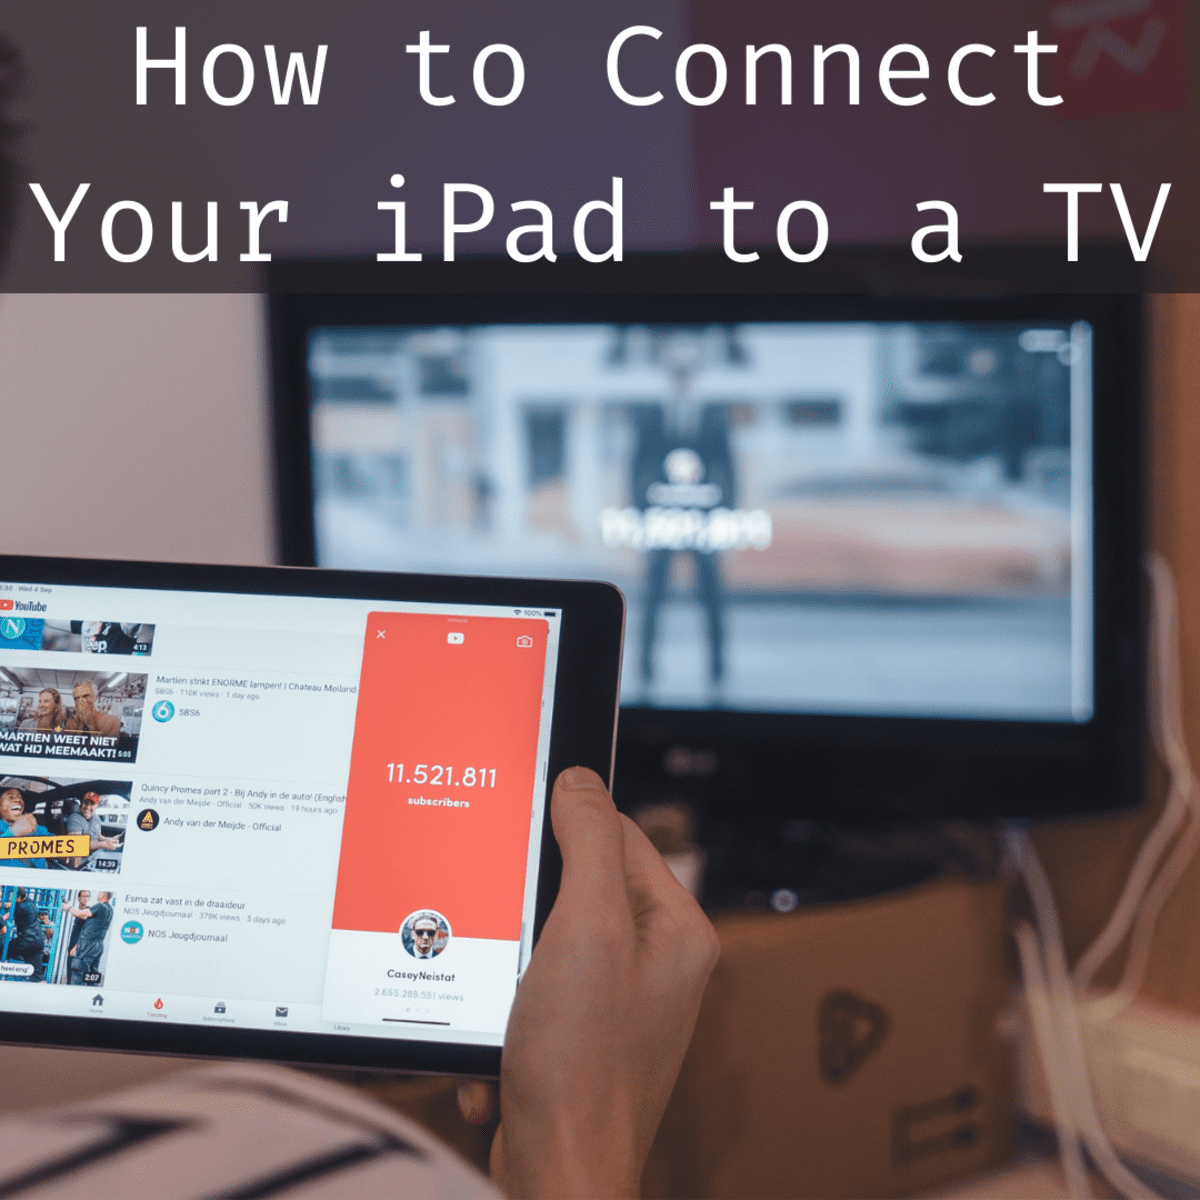 How To Connect An Ipad Tv With Hdmi, Can You Mirror Skygo From Iphone To Apple Tv